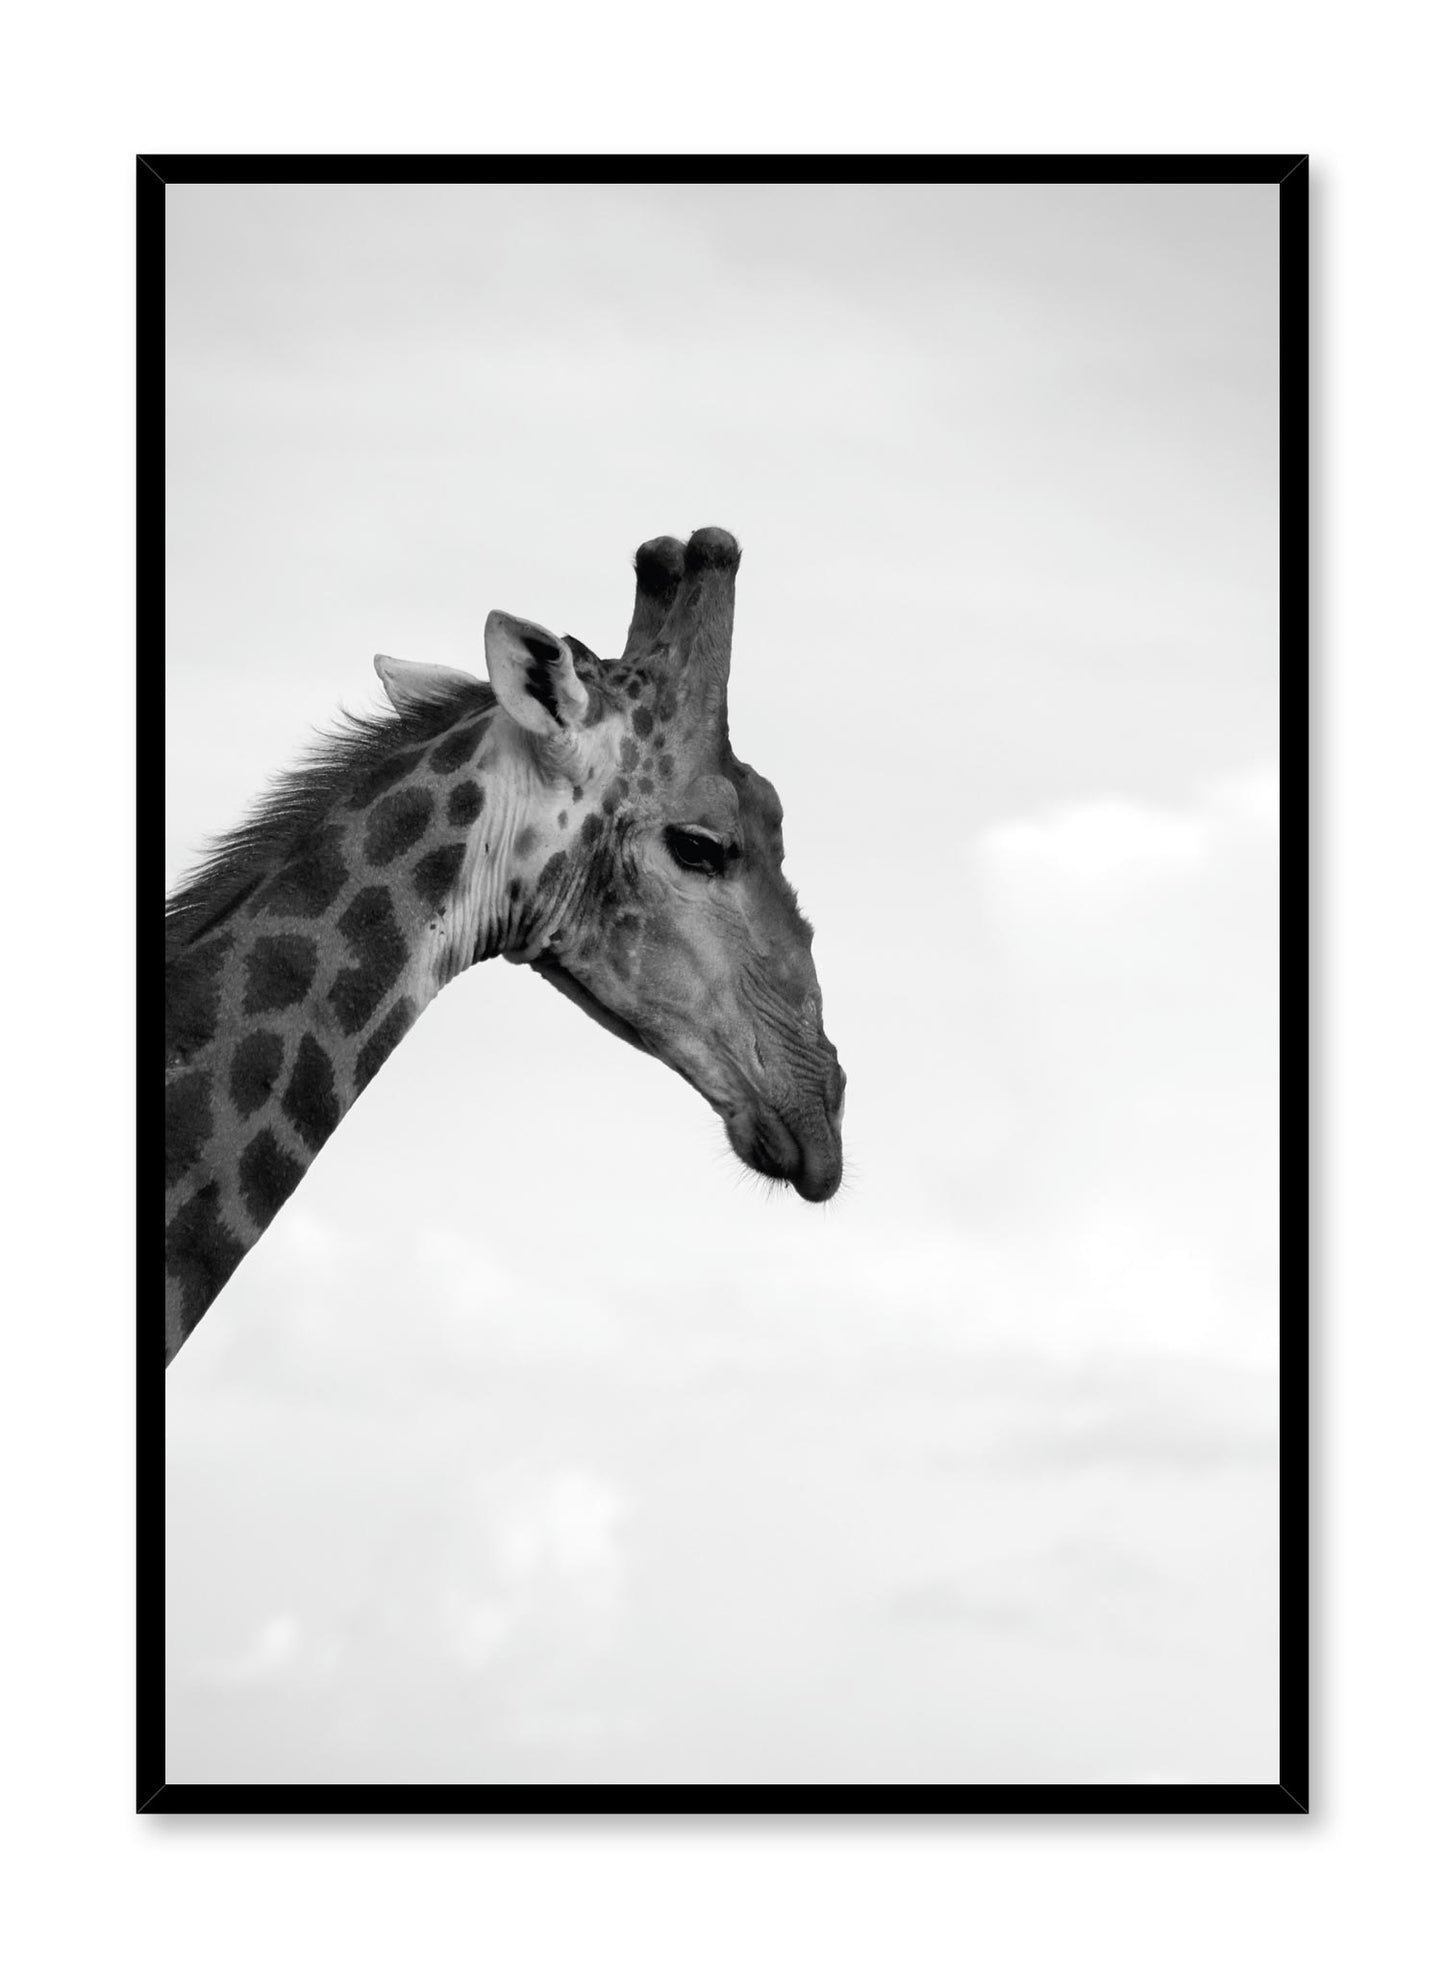 Minimalist design poster by Opposite Wall with black and white animal photography of Giraffe